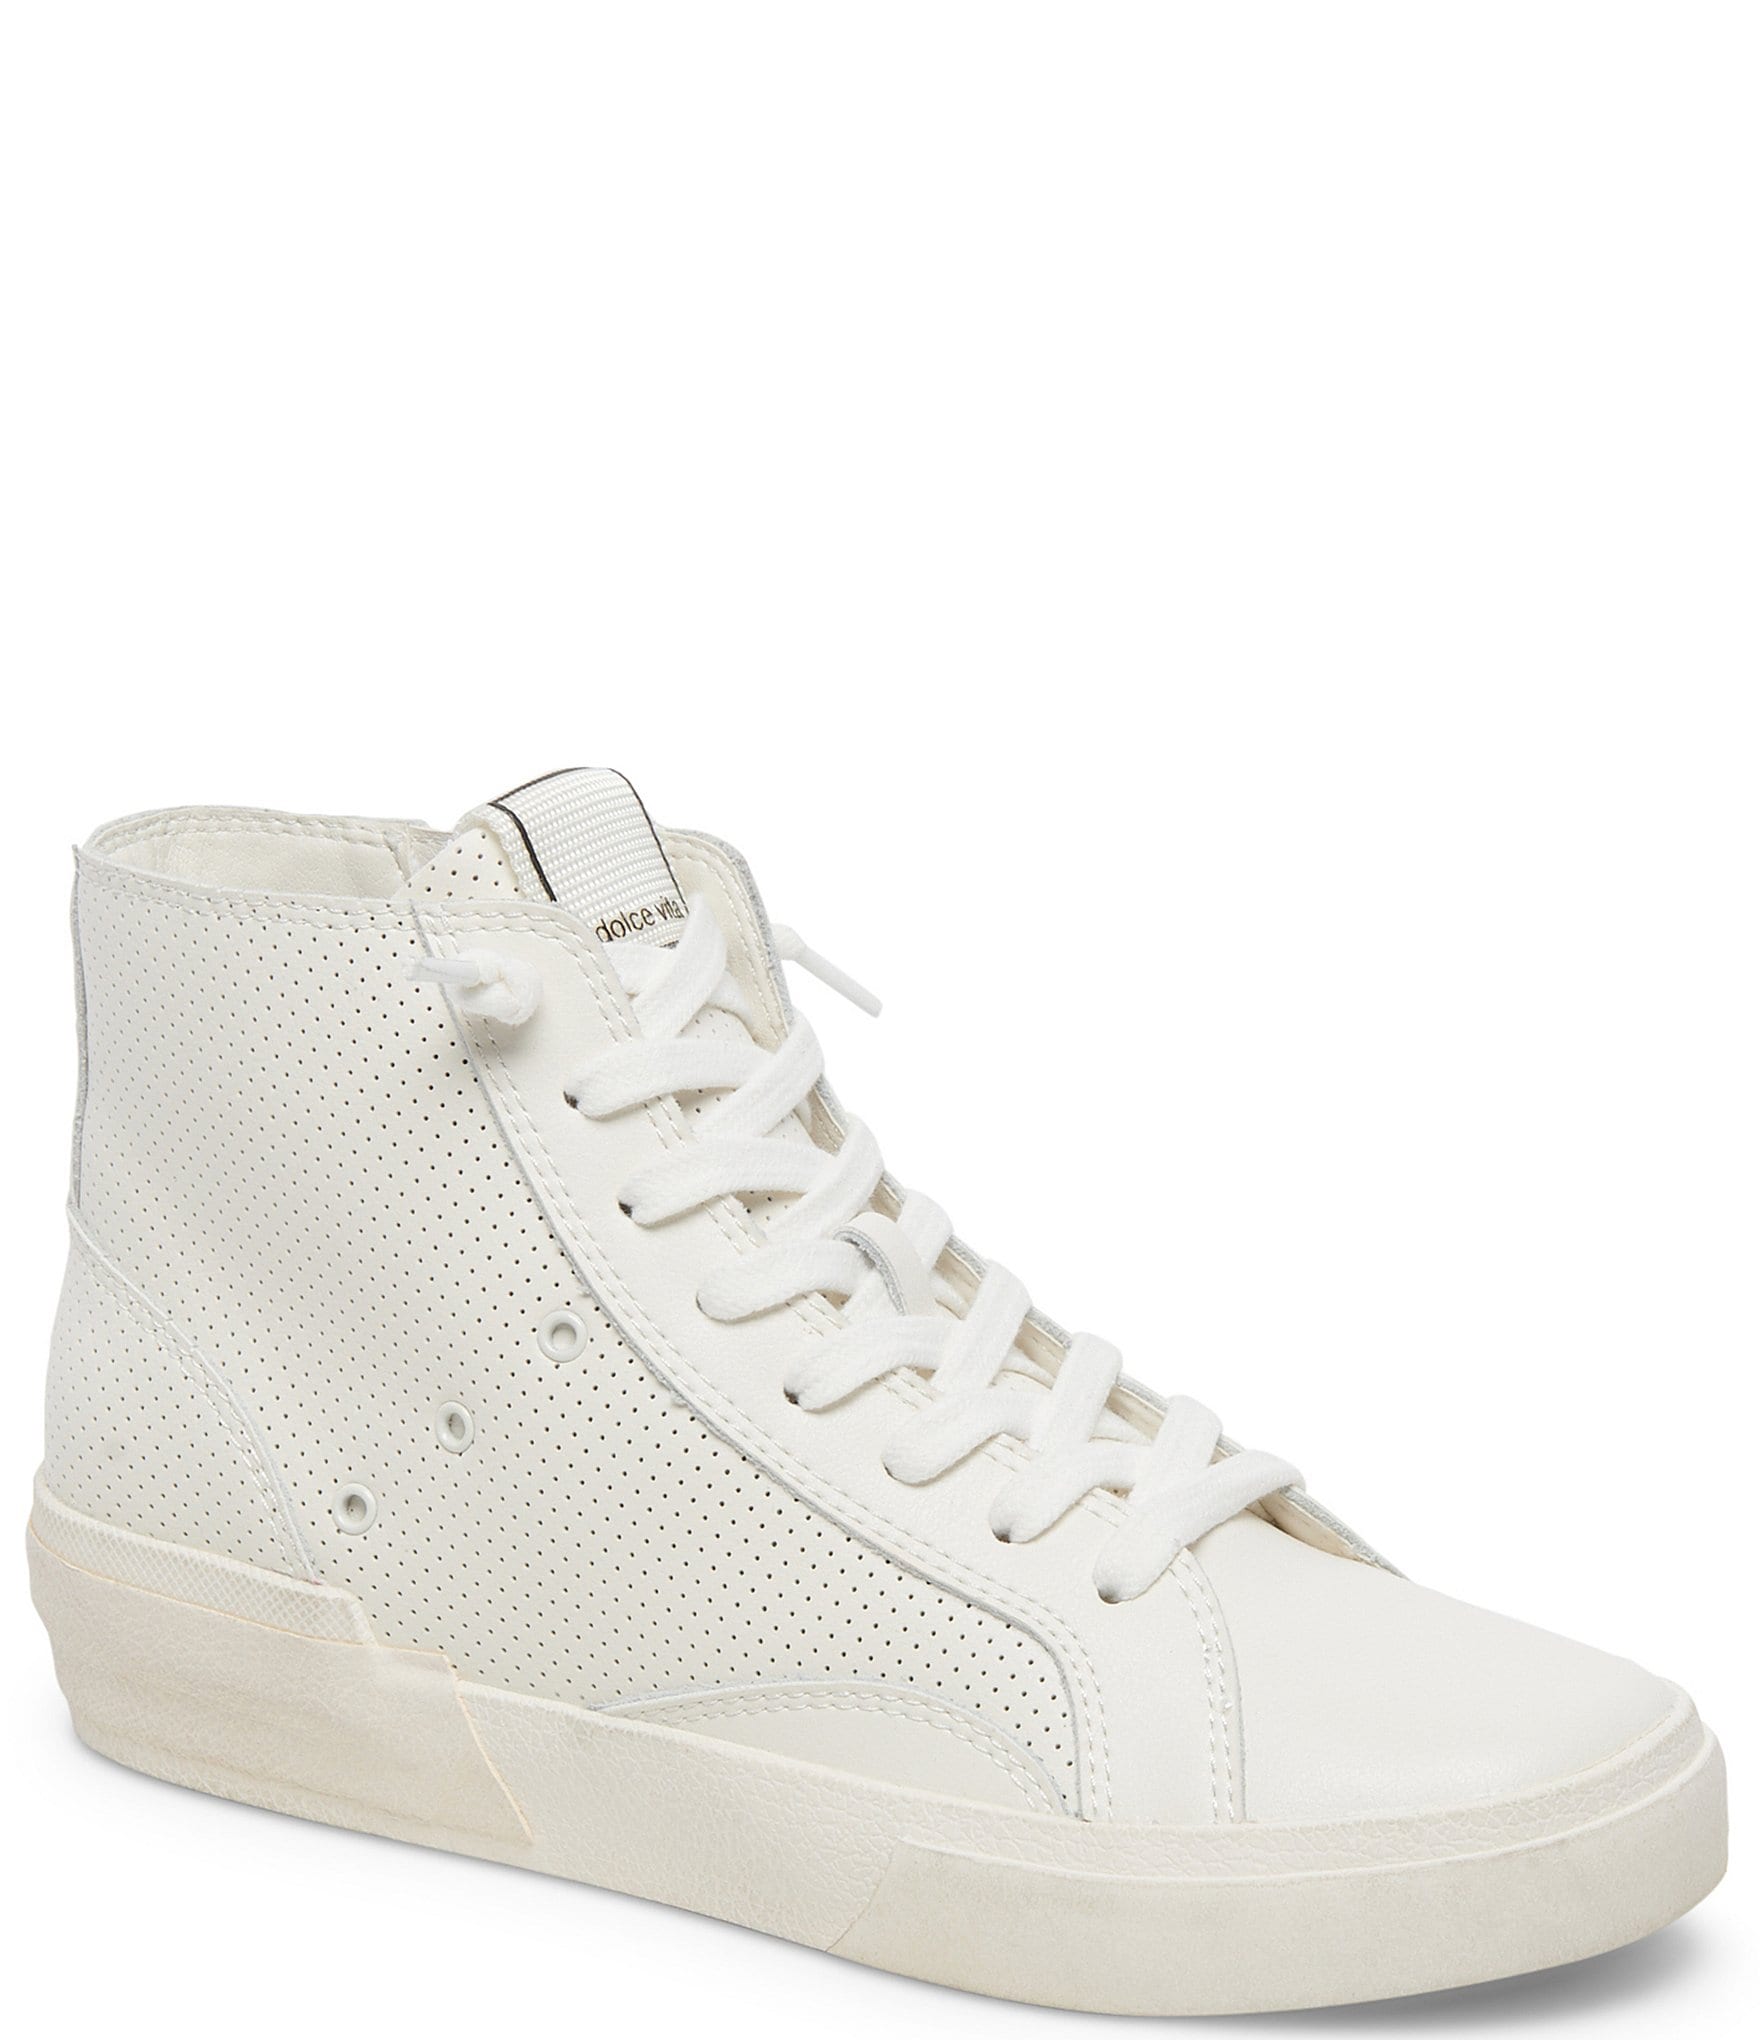 Dolce Vita Zohara Perforated Leather High Top Sneakers | Dillard's